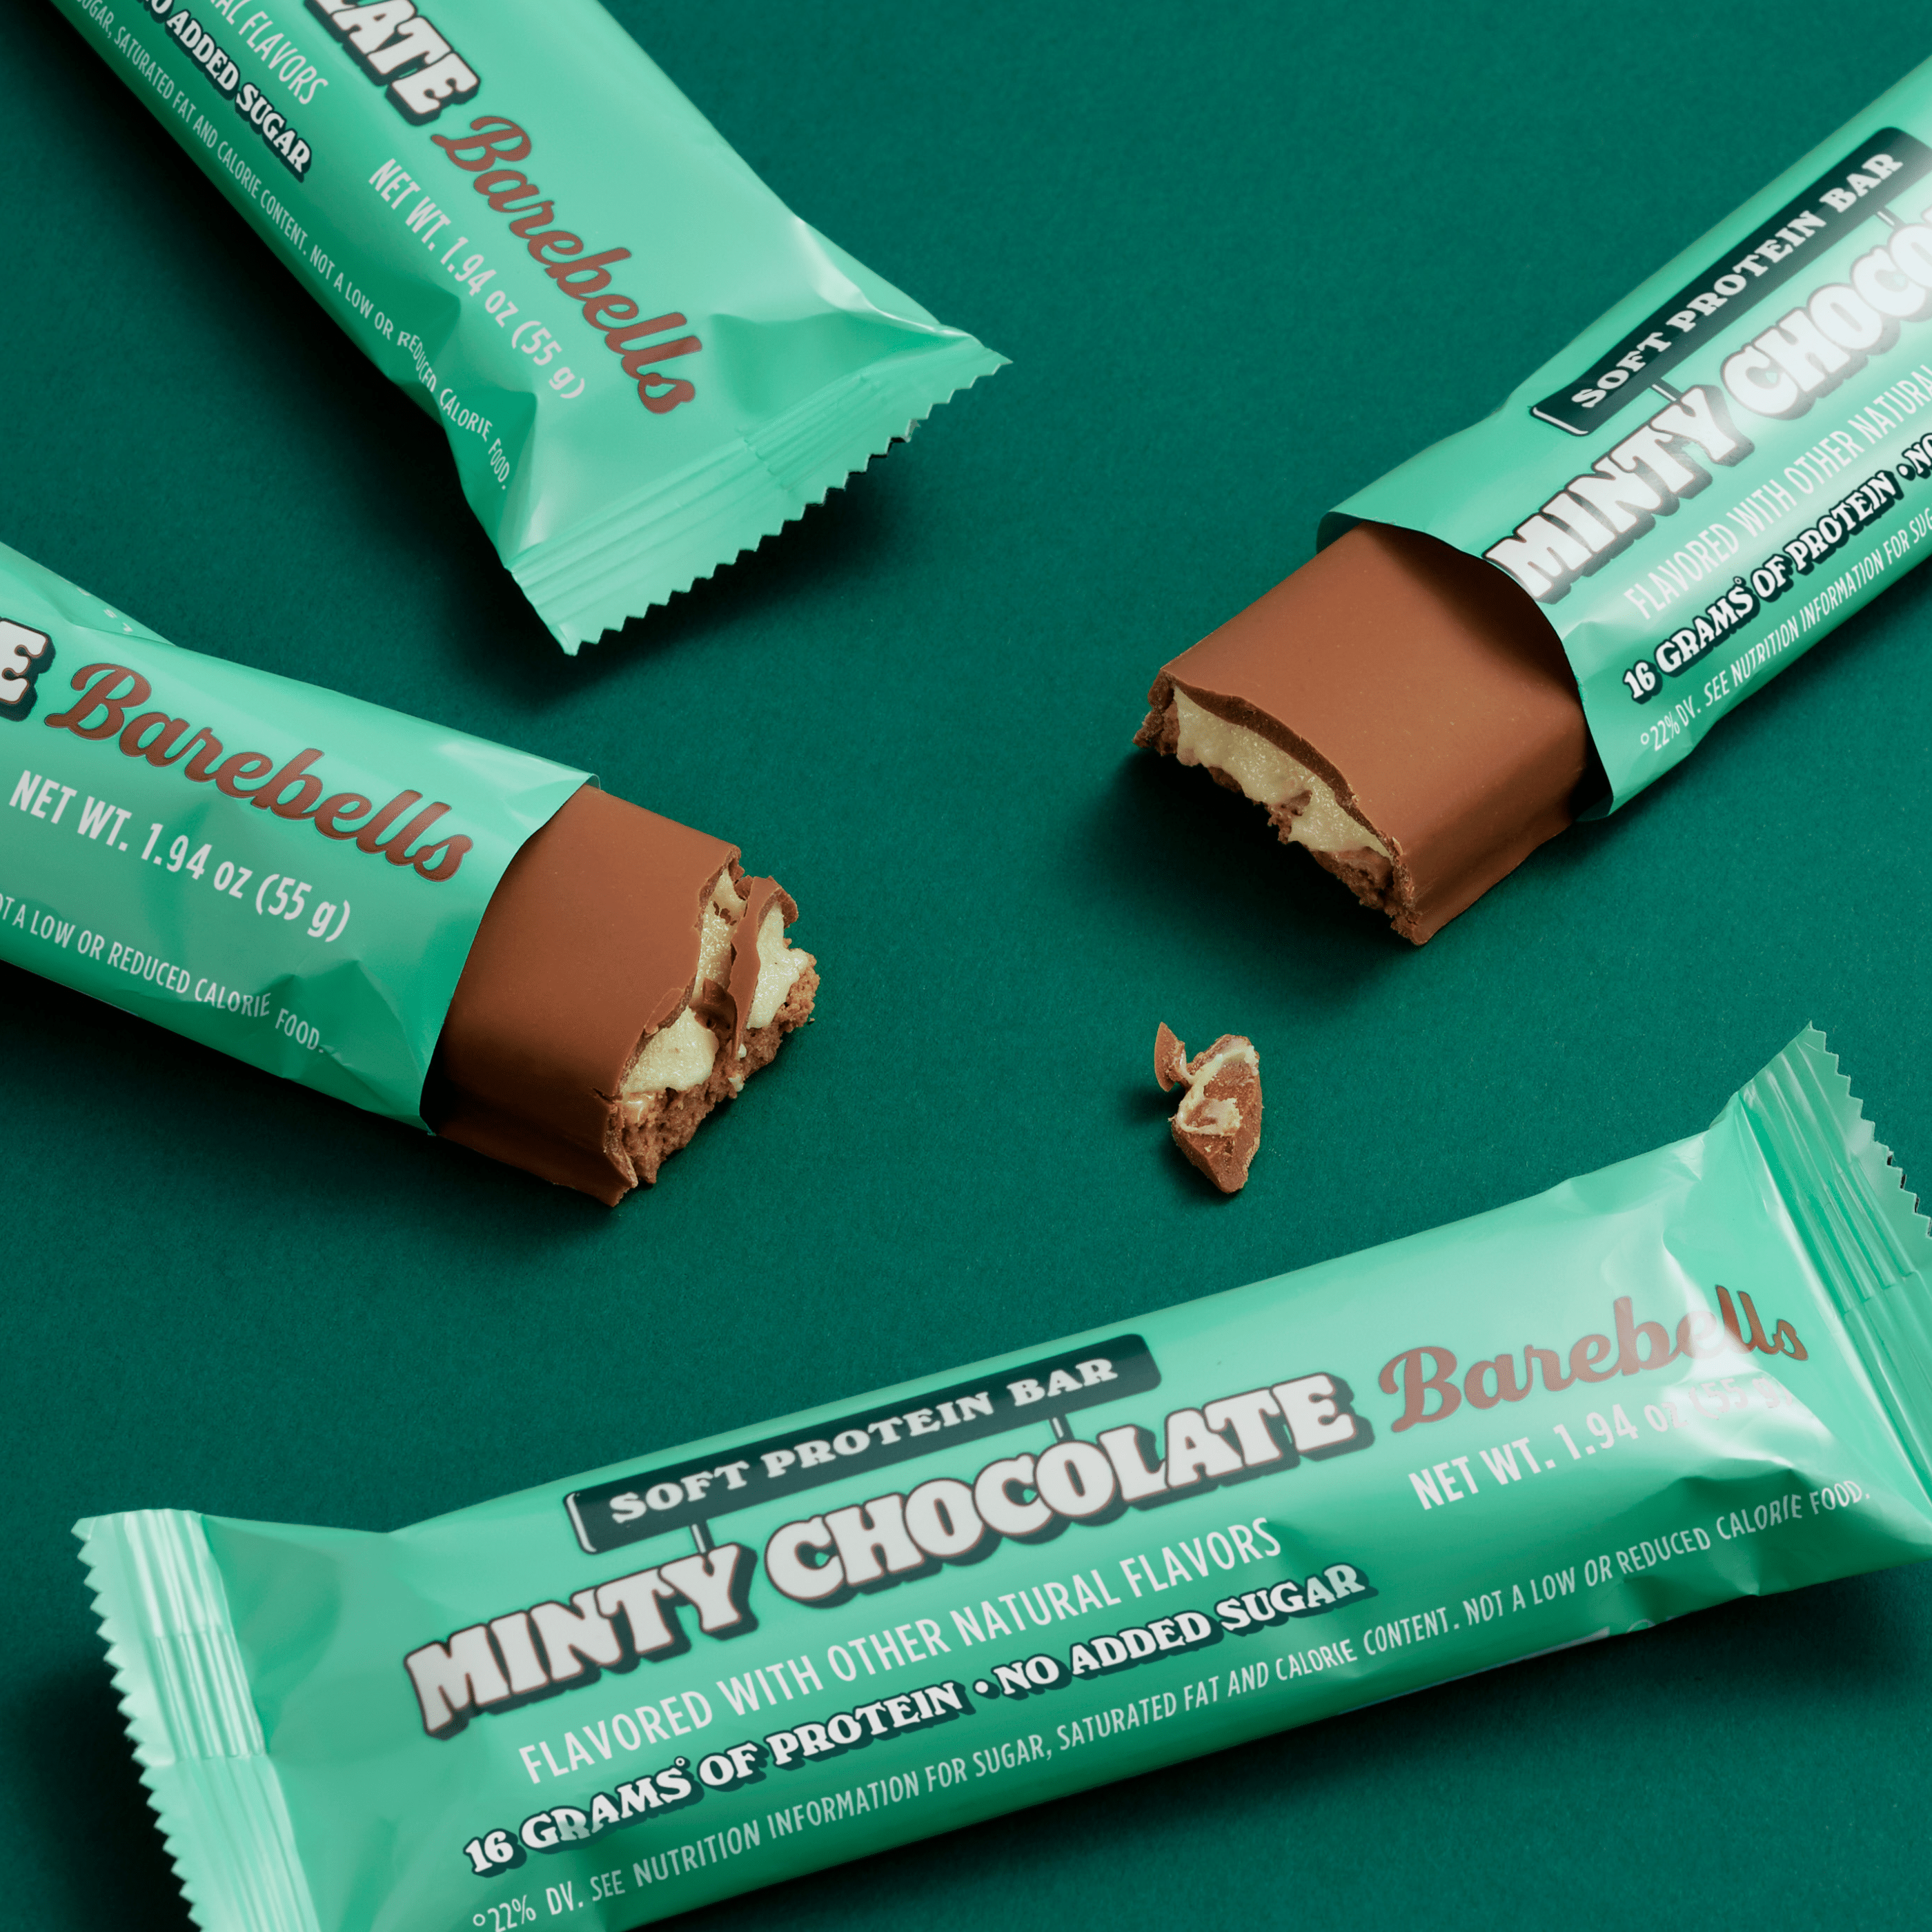 Minty Chocolate Barebells Soft Protein Bar launches in America